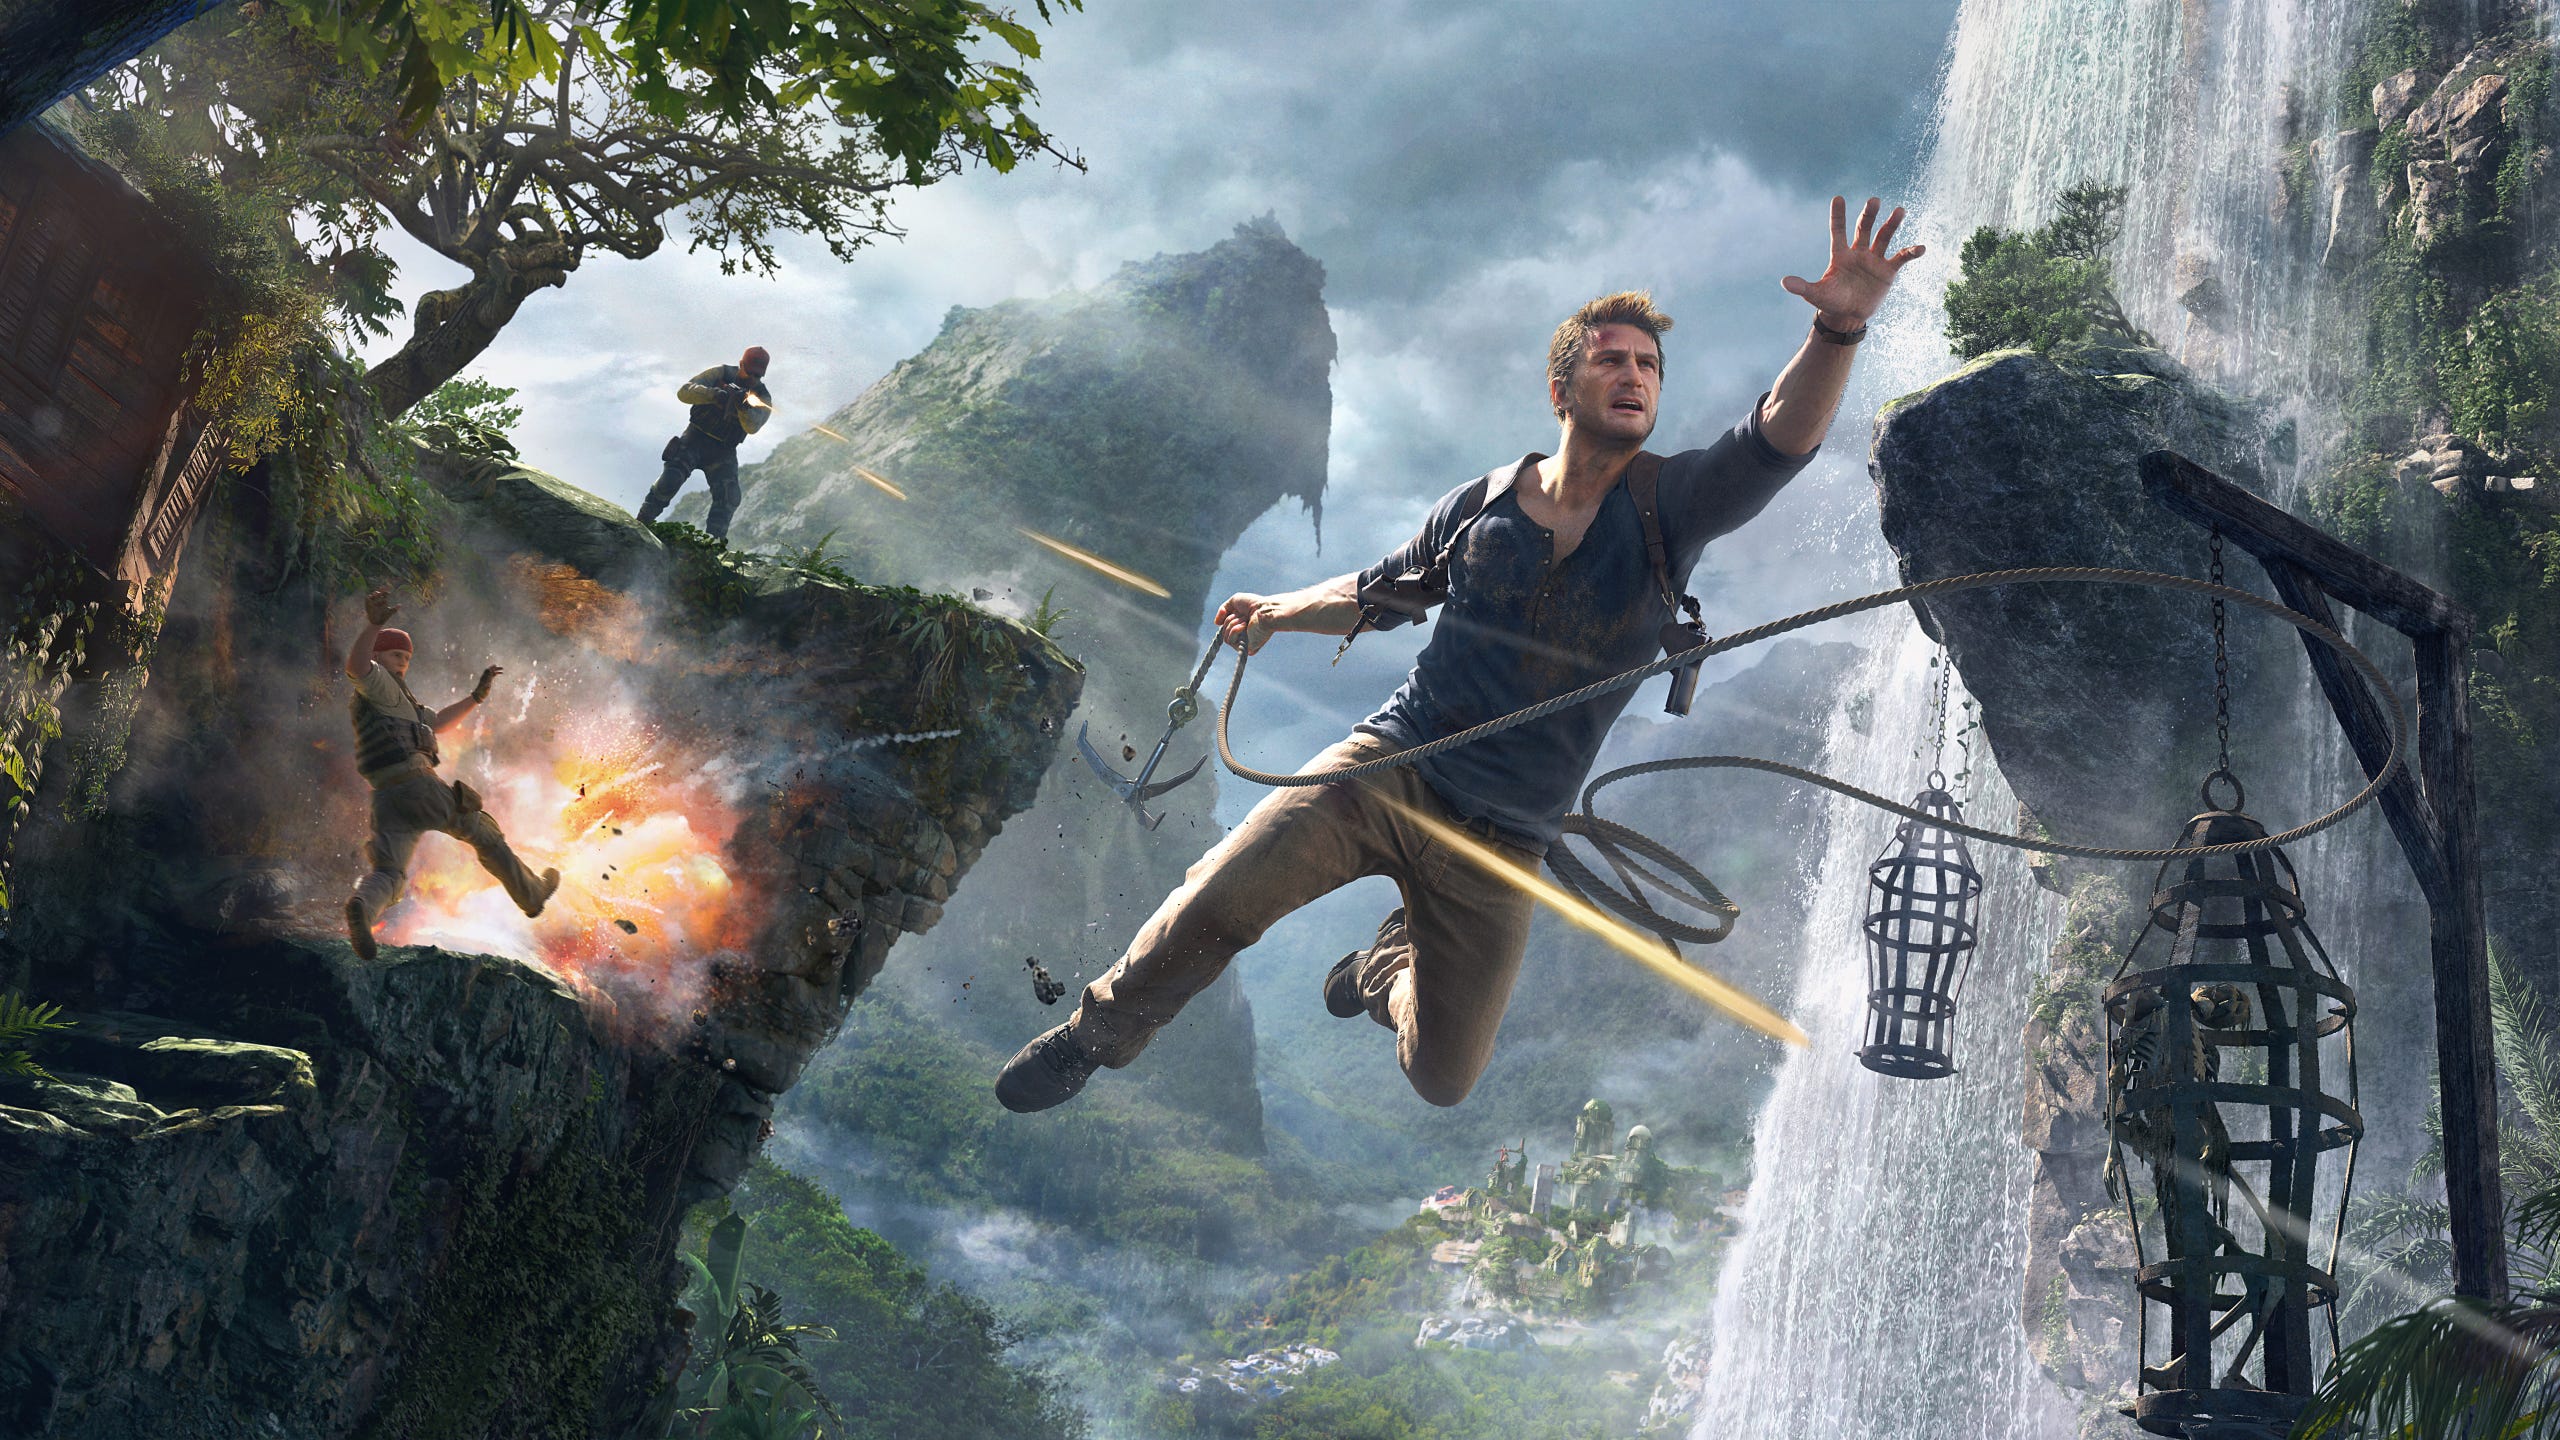 Watch Uncharted 4's full 14-minute E3 gameplay demo